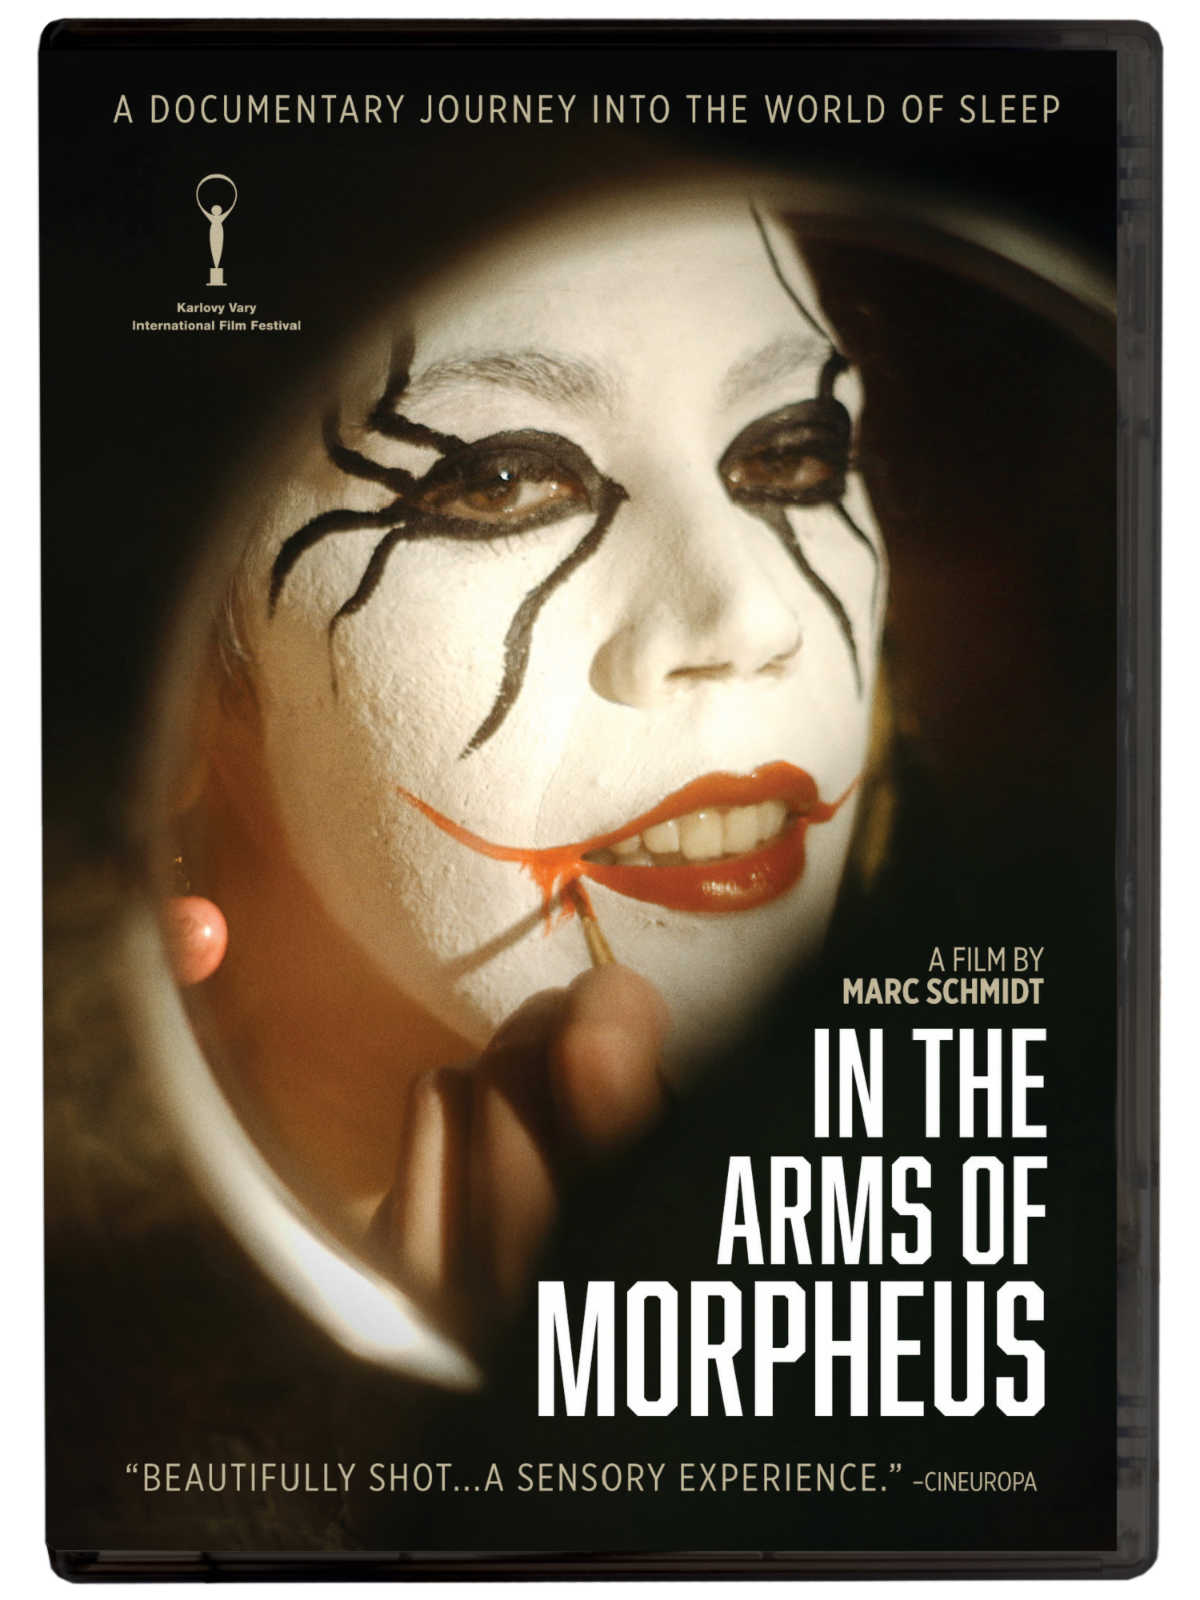 In The Arms of Morpheus is a fascinating documentary film that takes you on a journey into the amazing world of sleep. 